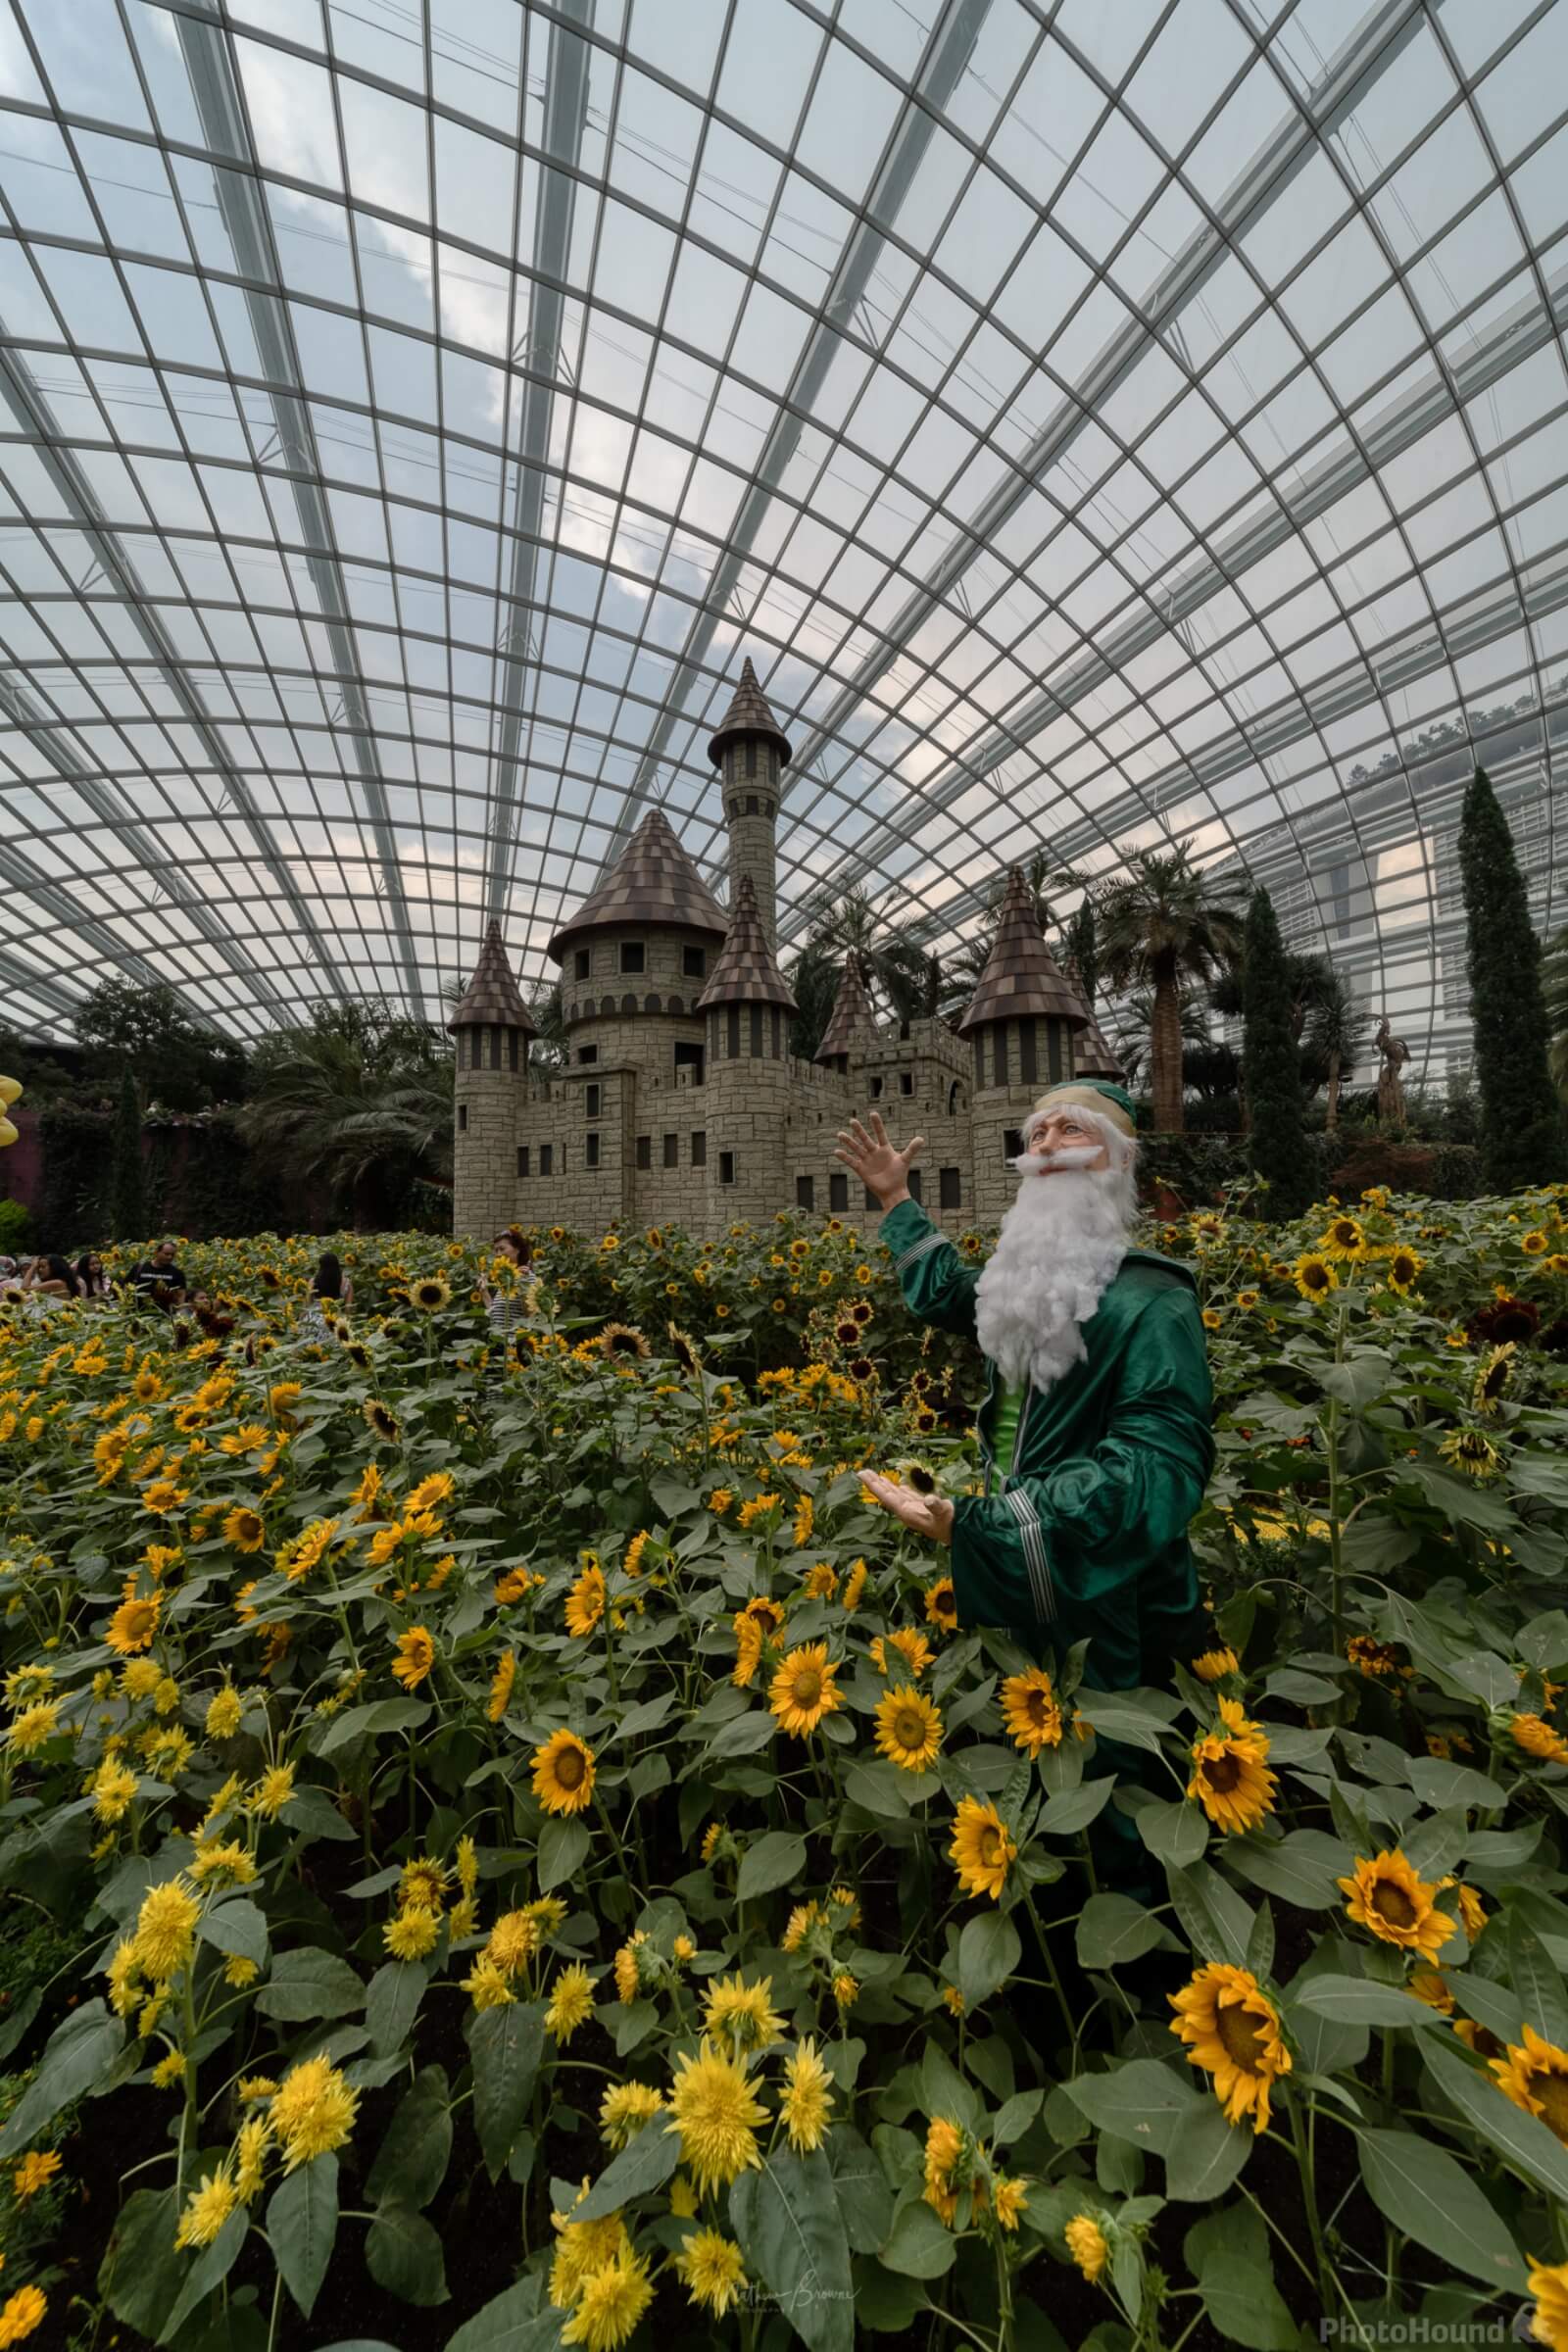 Image of Flower Dome by Mathew Browne